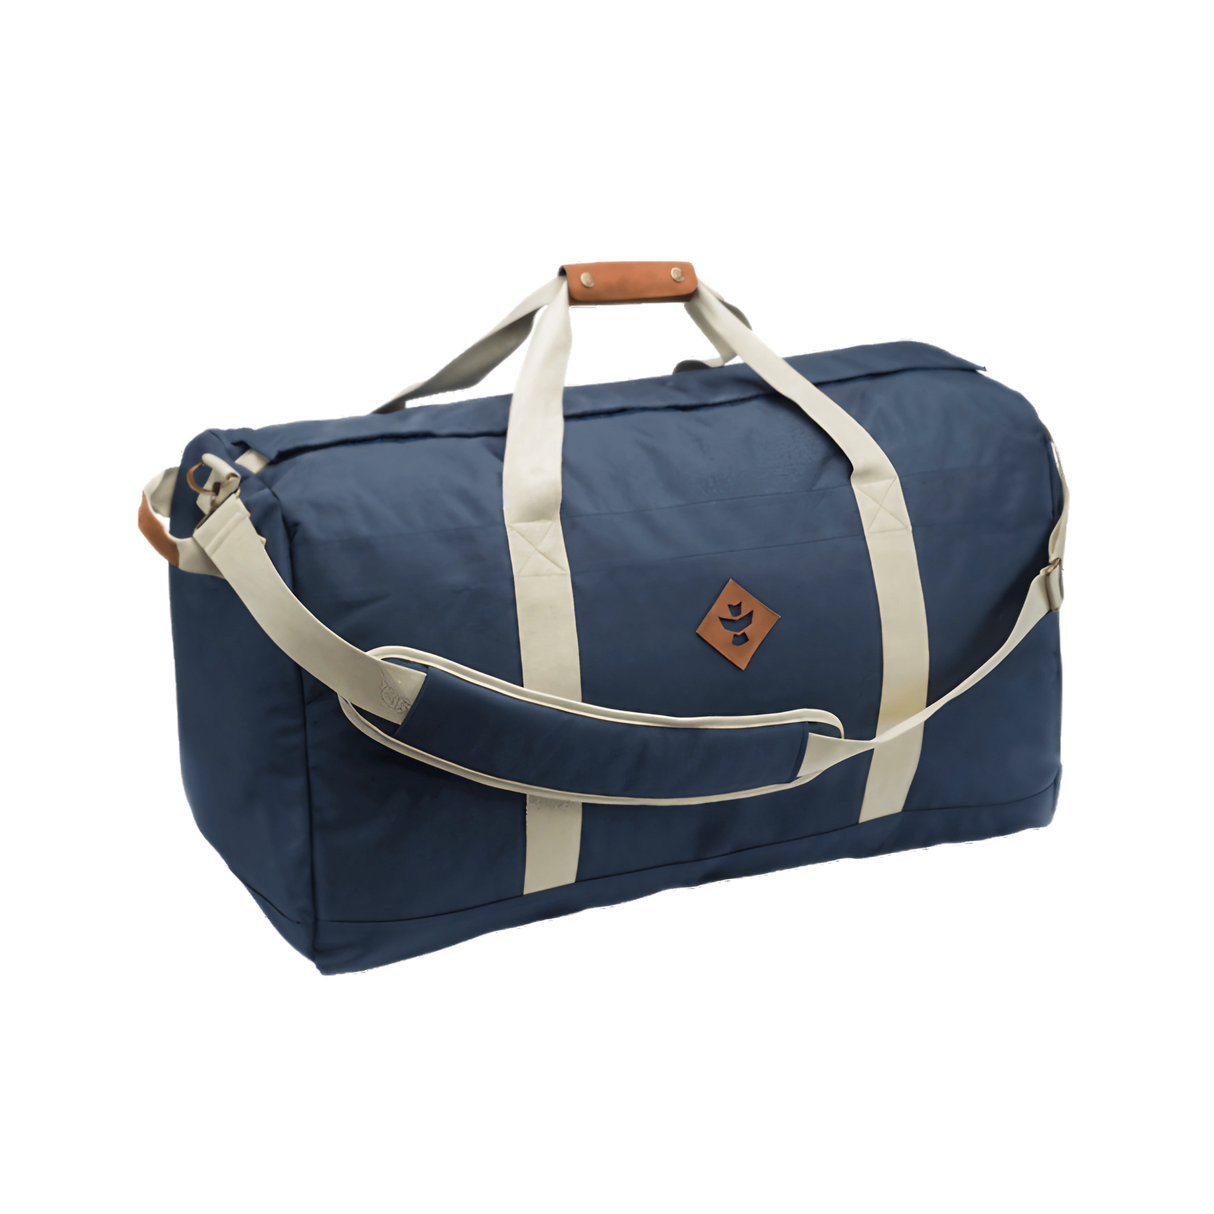 Revelry Supply Continental Navy Duffel Bag with Rubber Material and Medium Size, Front View